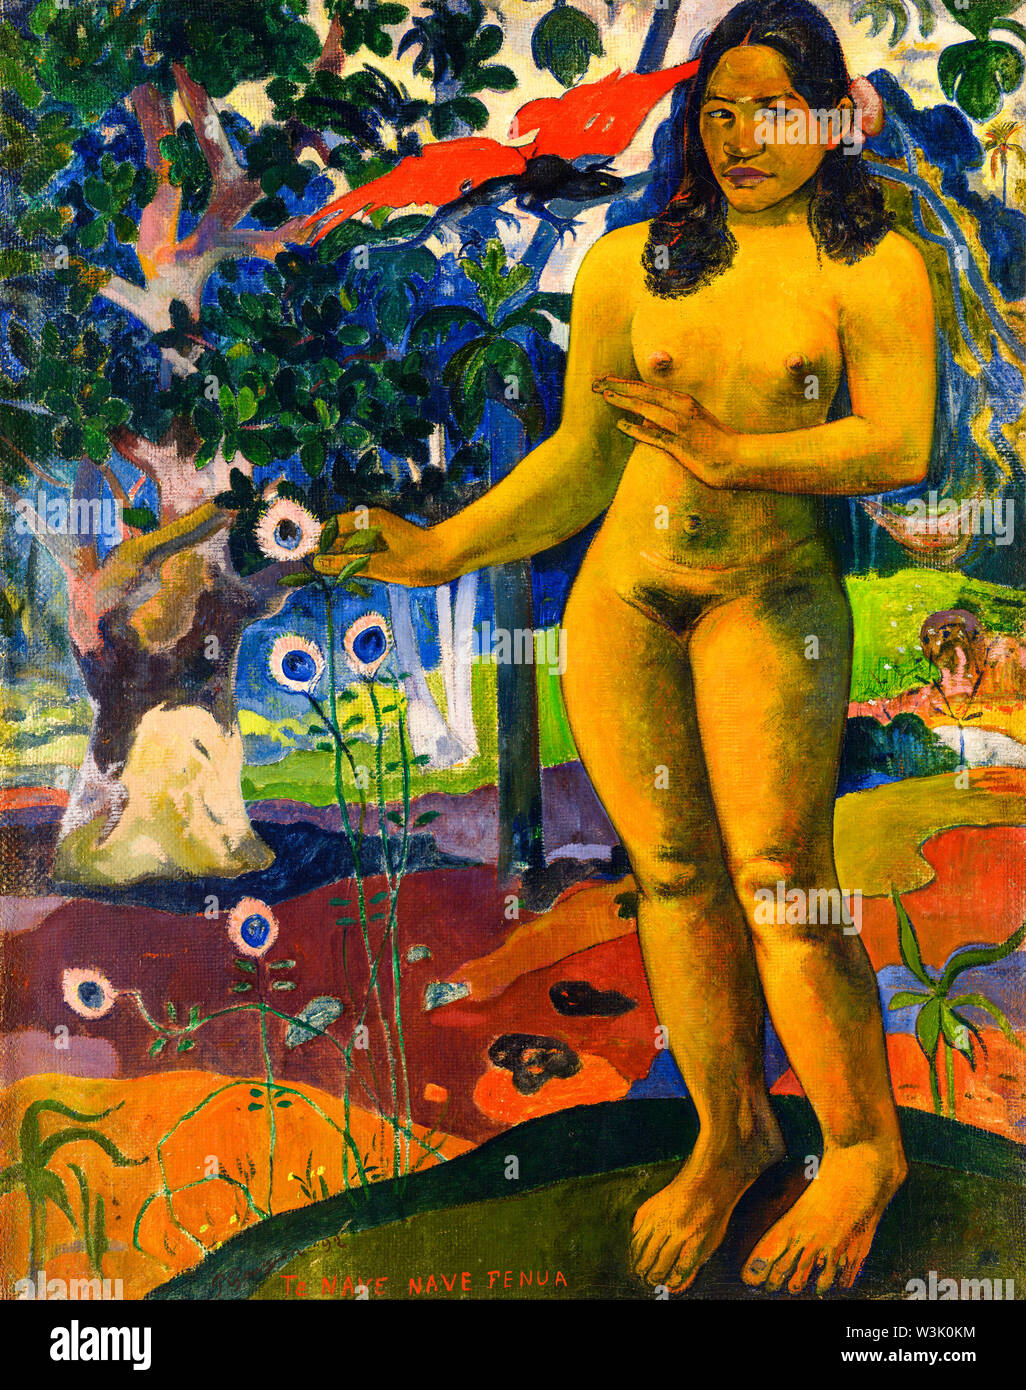 Paul Gauguin, Te Nave Nave Fenua, (The Delightful Land), painting, 1892 Stock Photo